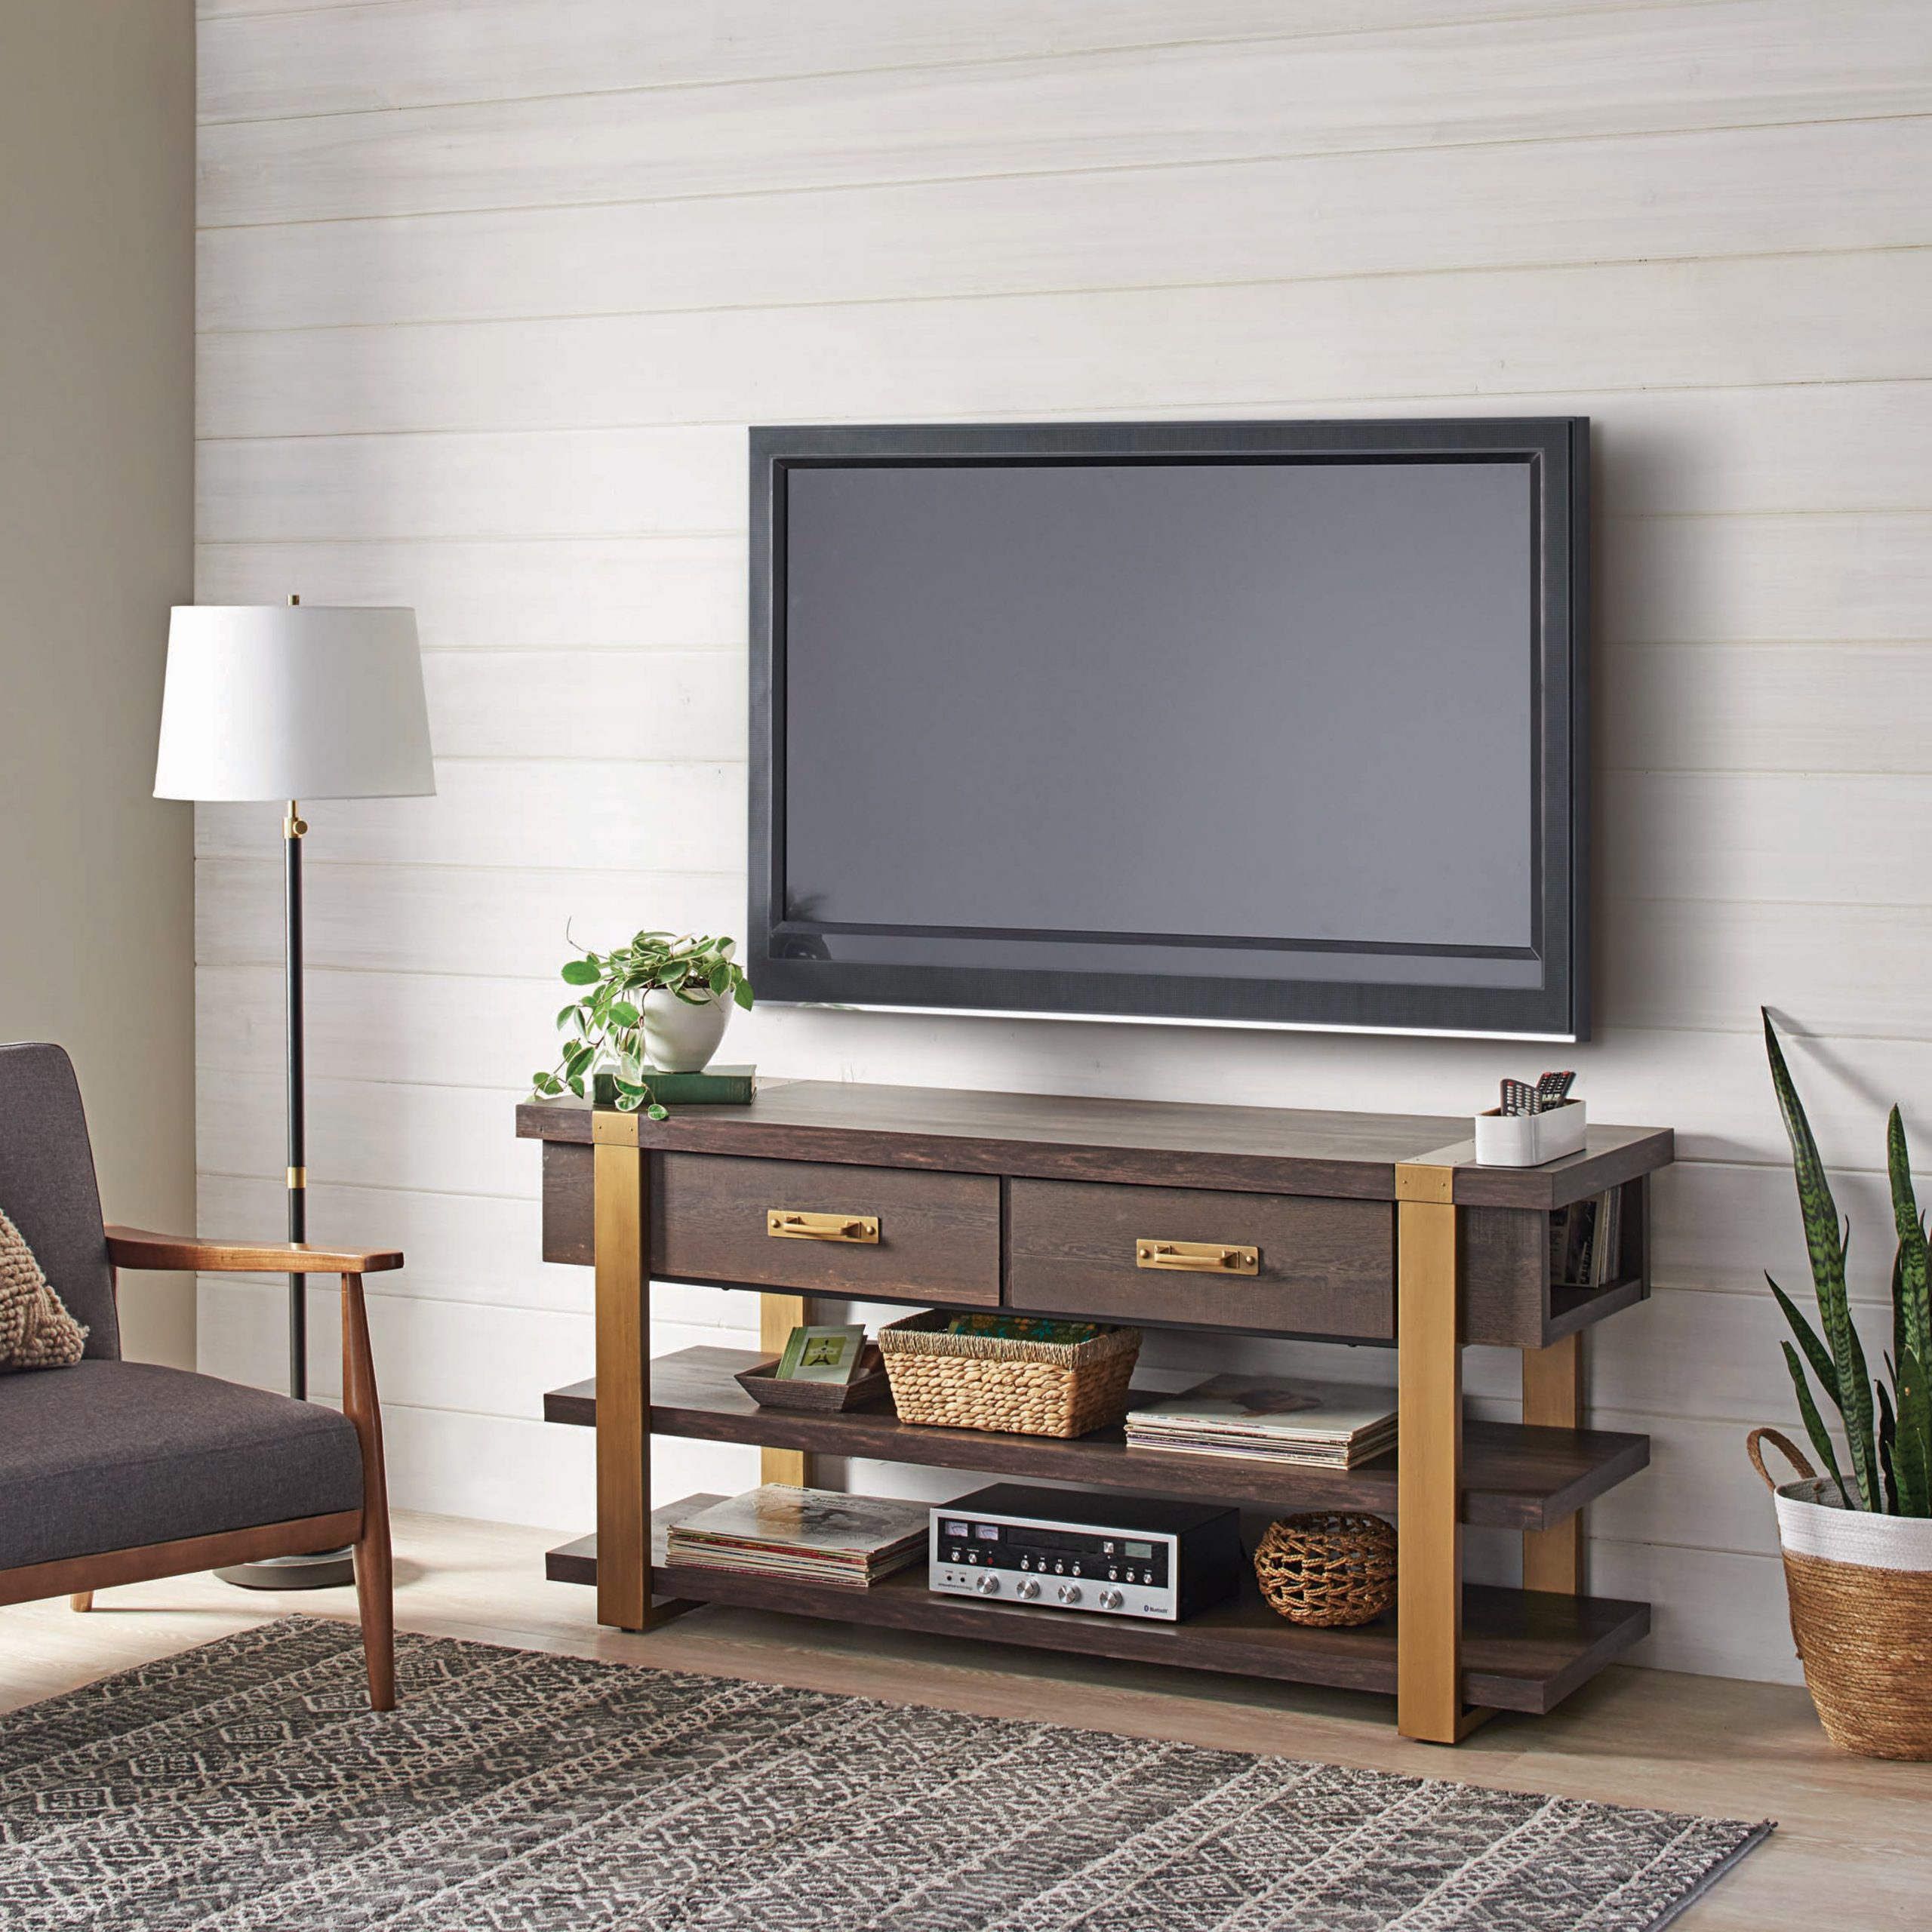 Modern and sleek! Check out this TV stand that Somers Furniture designed,  not only does it work perfe…